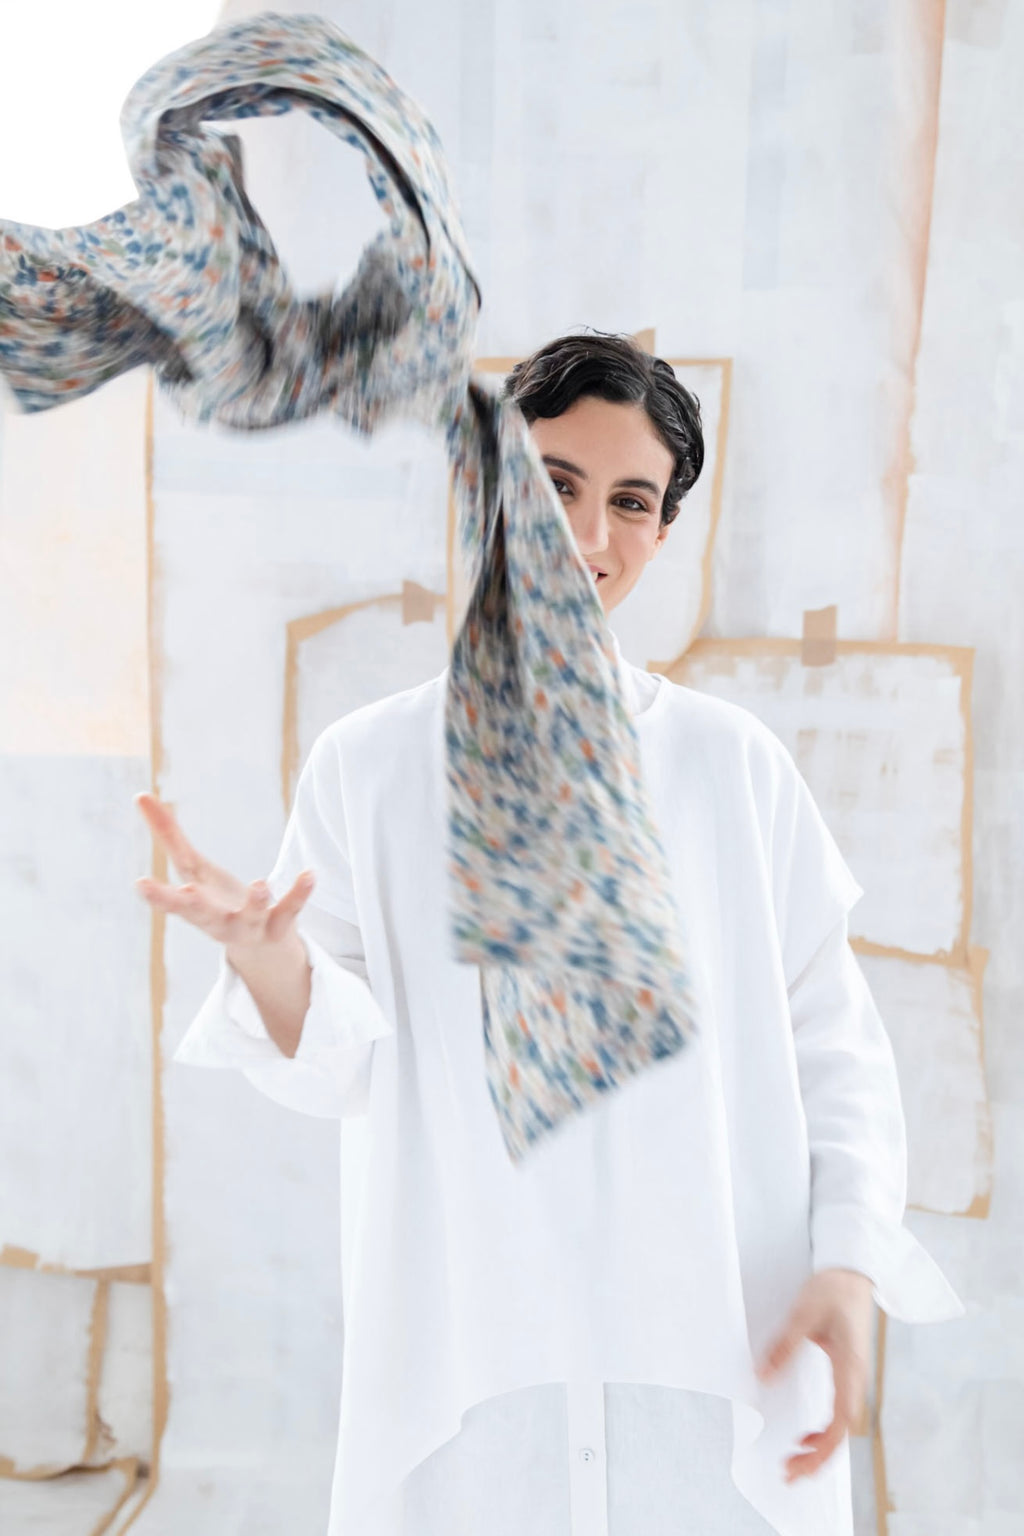 Obi Scarf | Made with Liberty Fabric | Poppy Forest